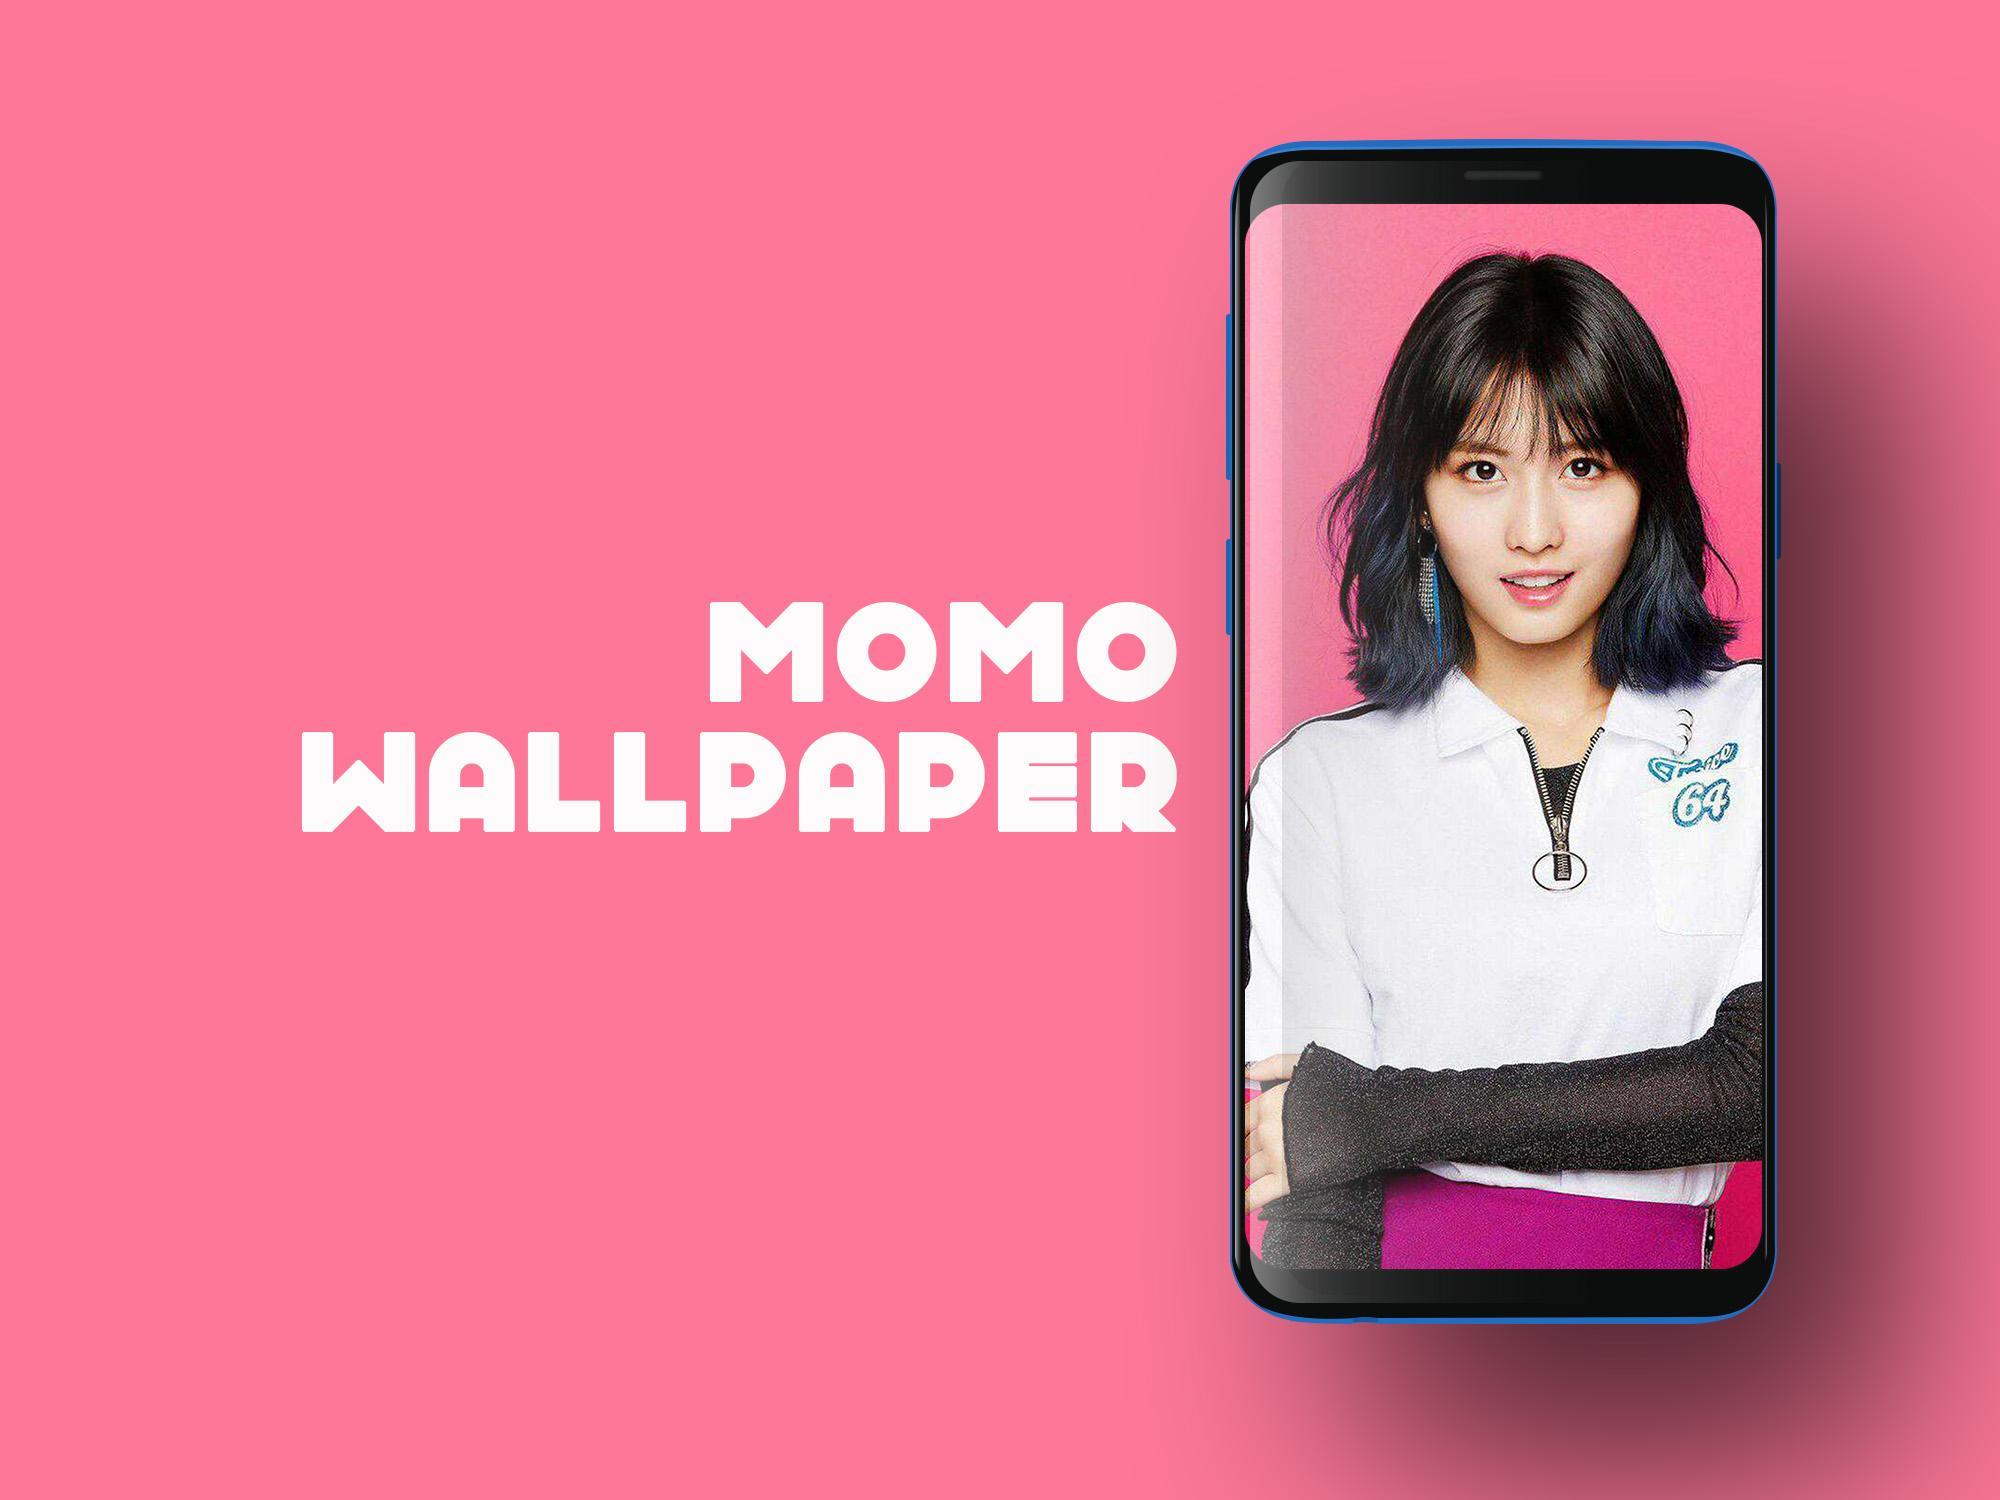 Twice Momo Wallpapers Kpop Fans Hd New For Android Apk Download